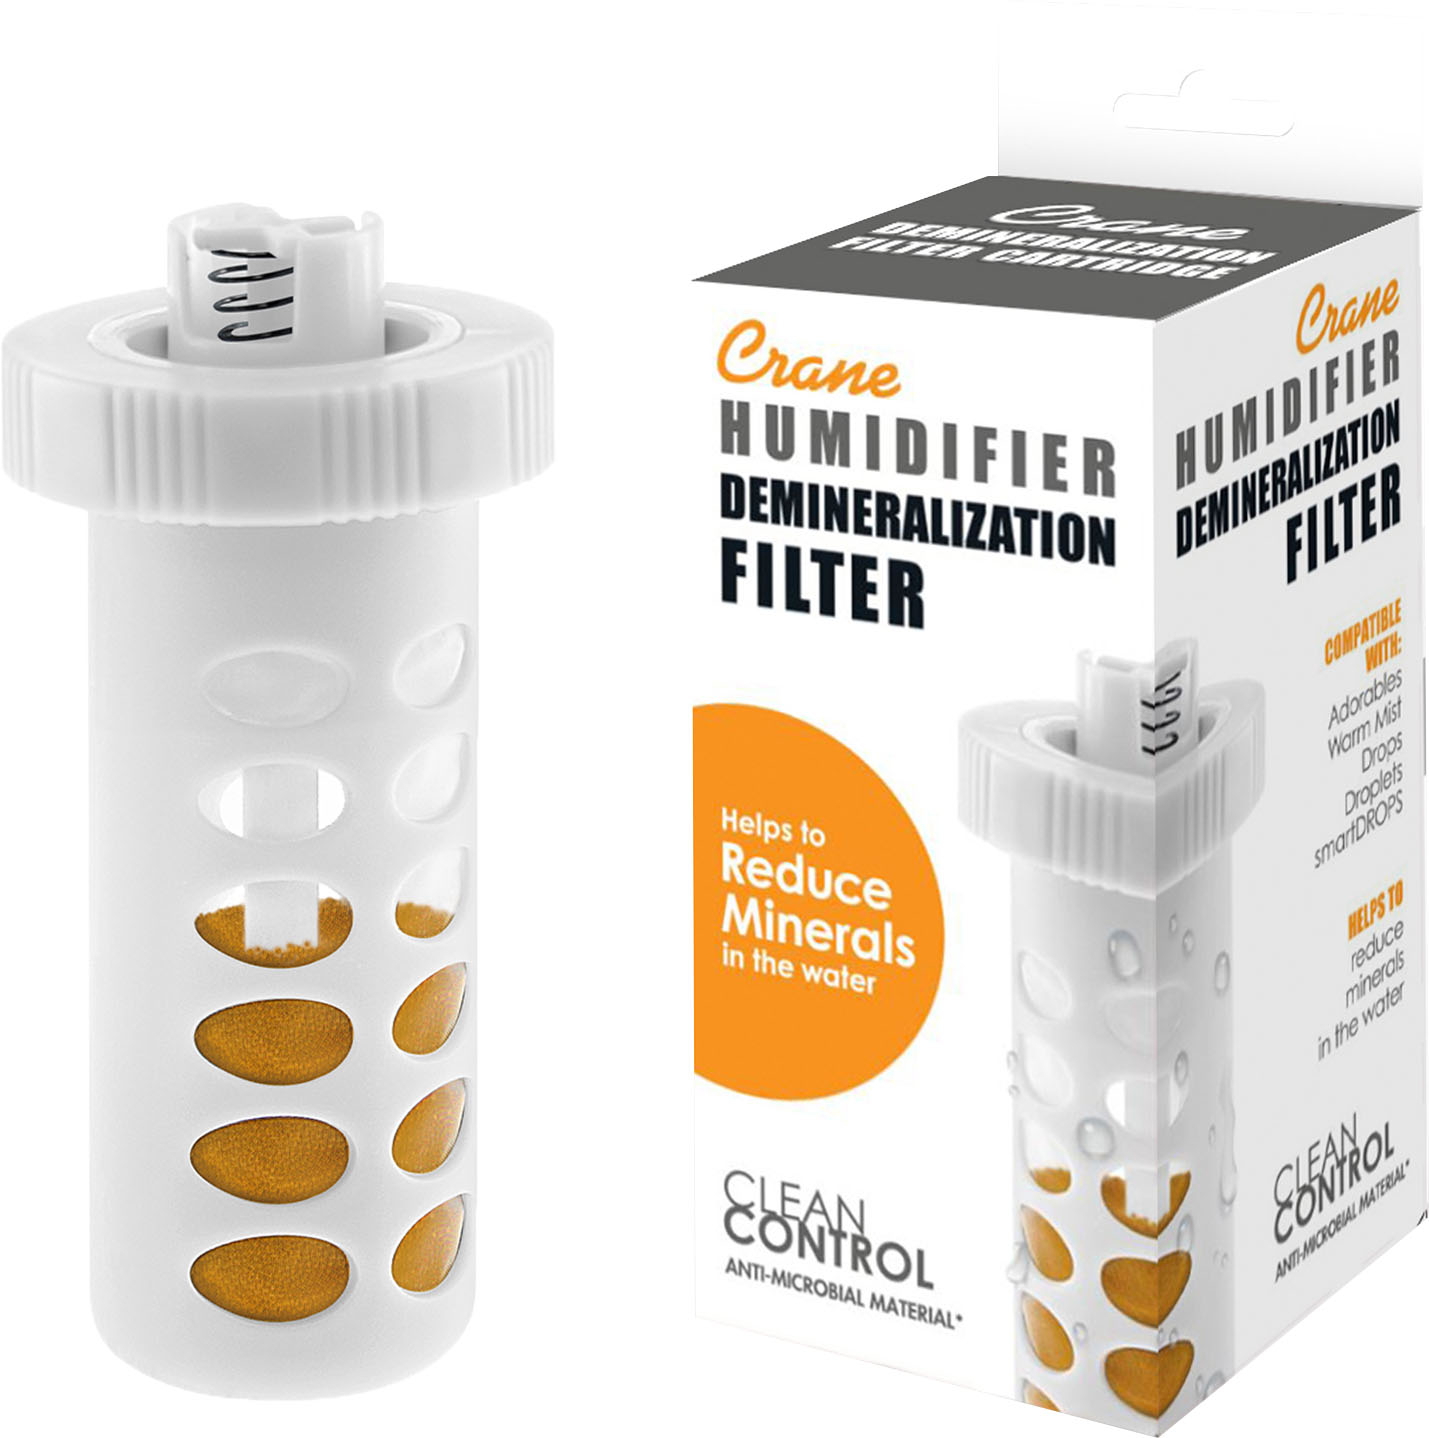 Crane HS-1932 Universal Animal Humidifier Filter for sale online